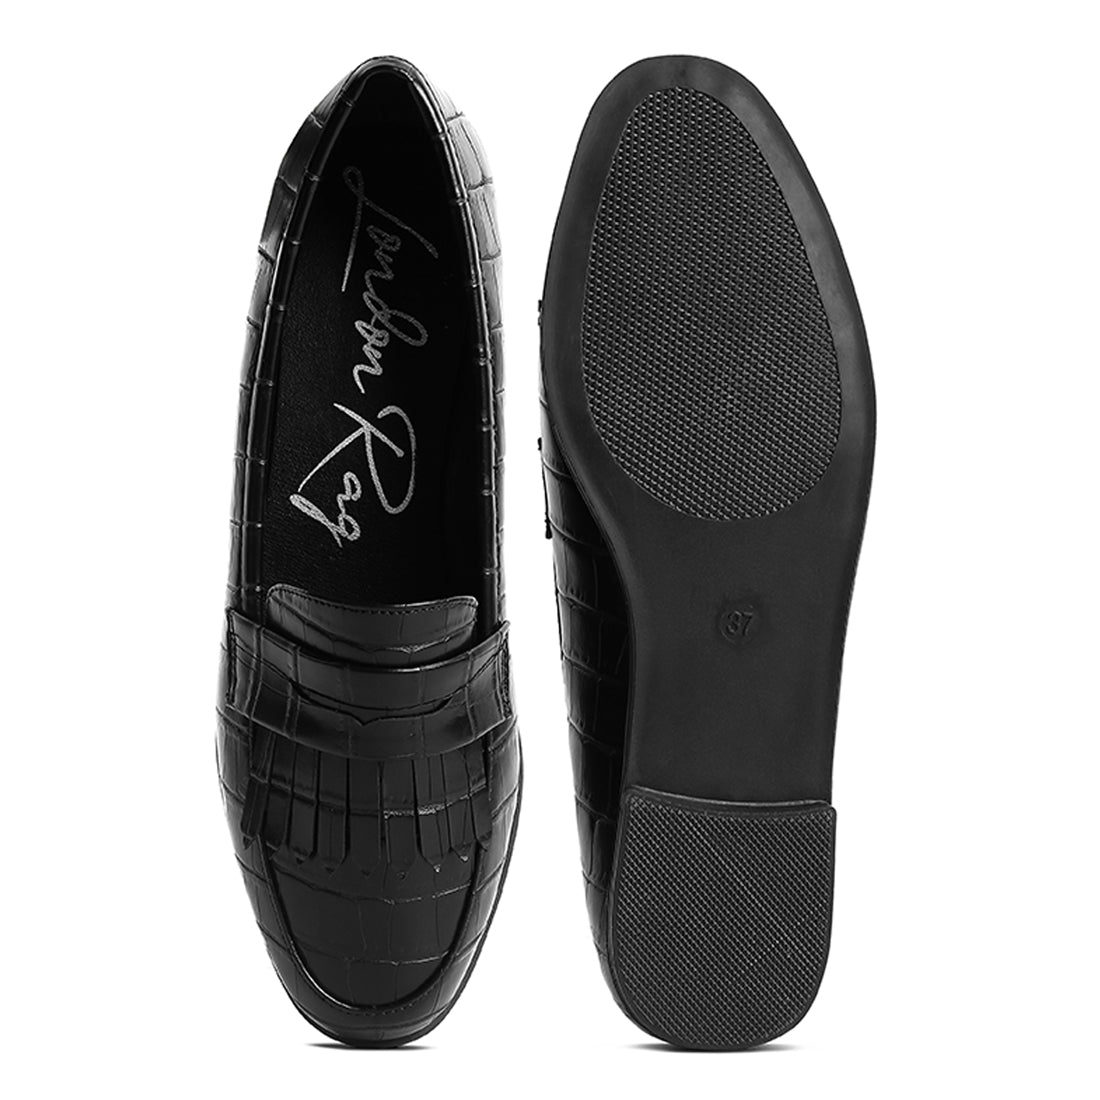 Black Patent PU Everyday Loafer